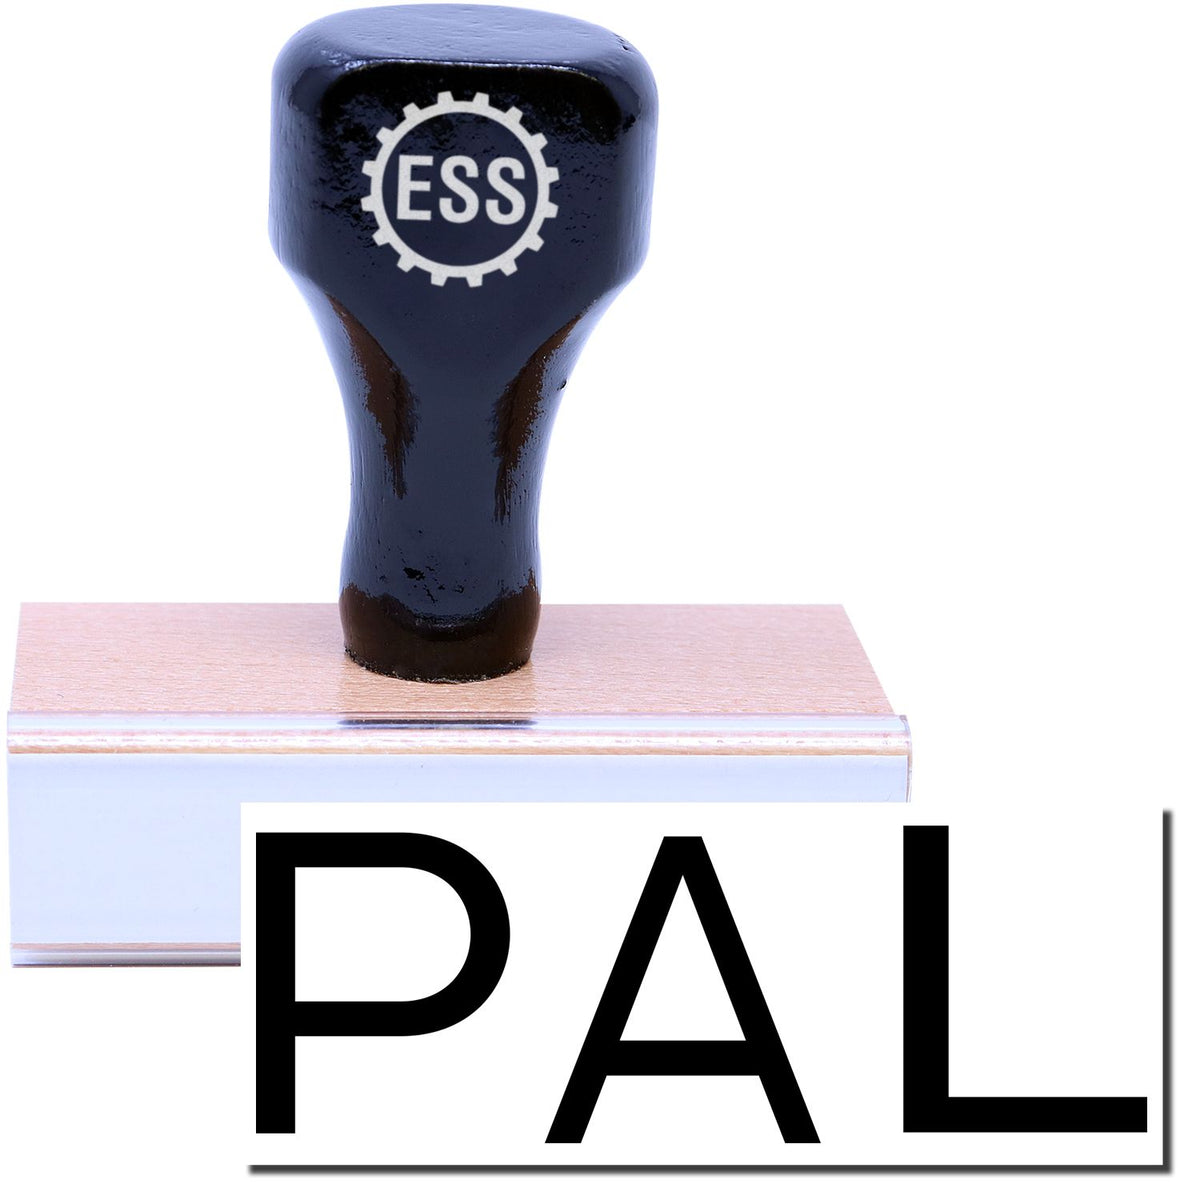 A stock office rubber stamp with a stamped image showing how the text &quot;PAL&quot; is displayed after stamping.